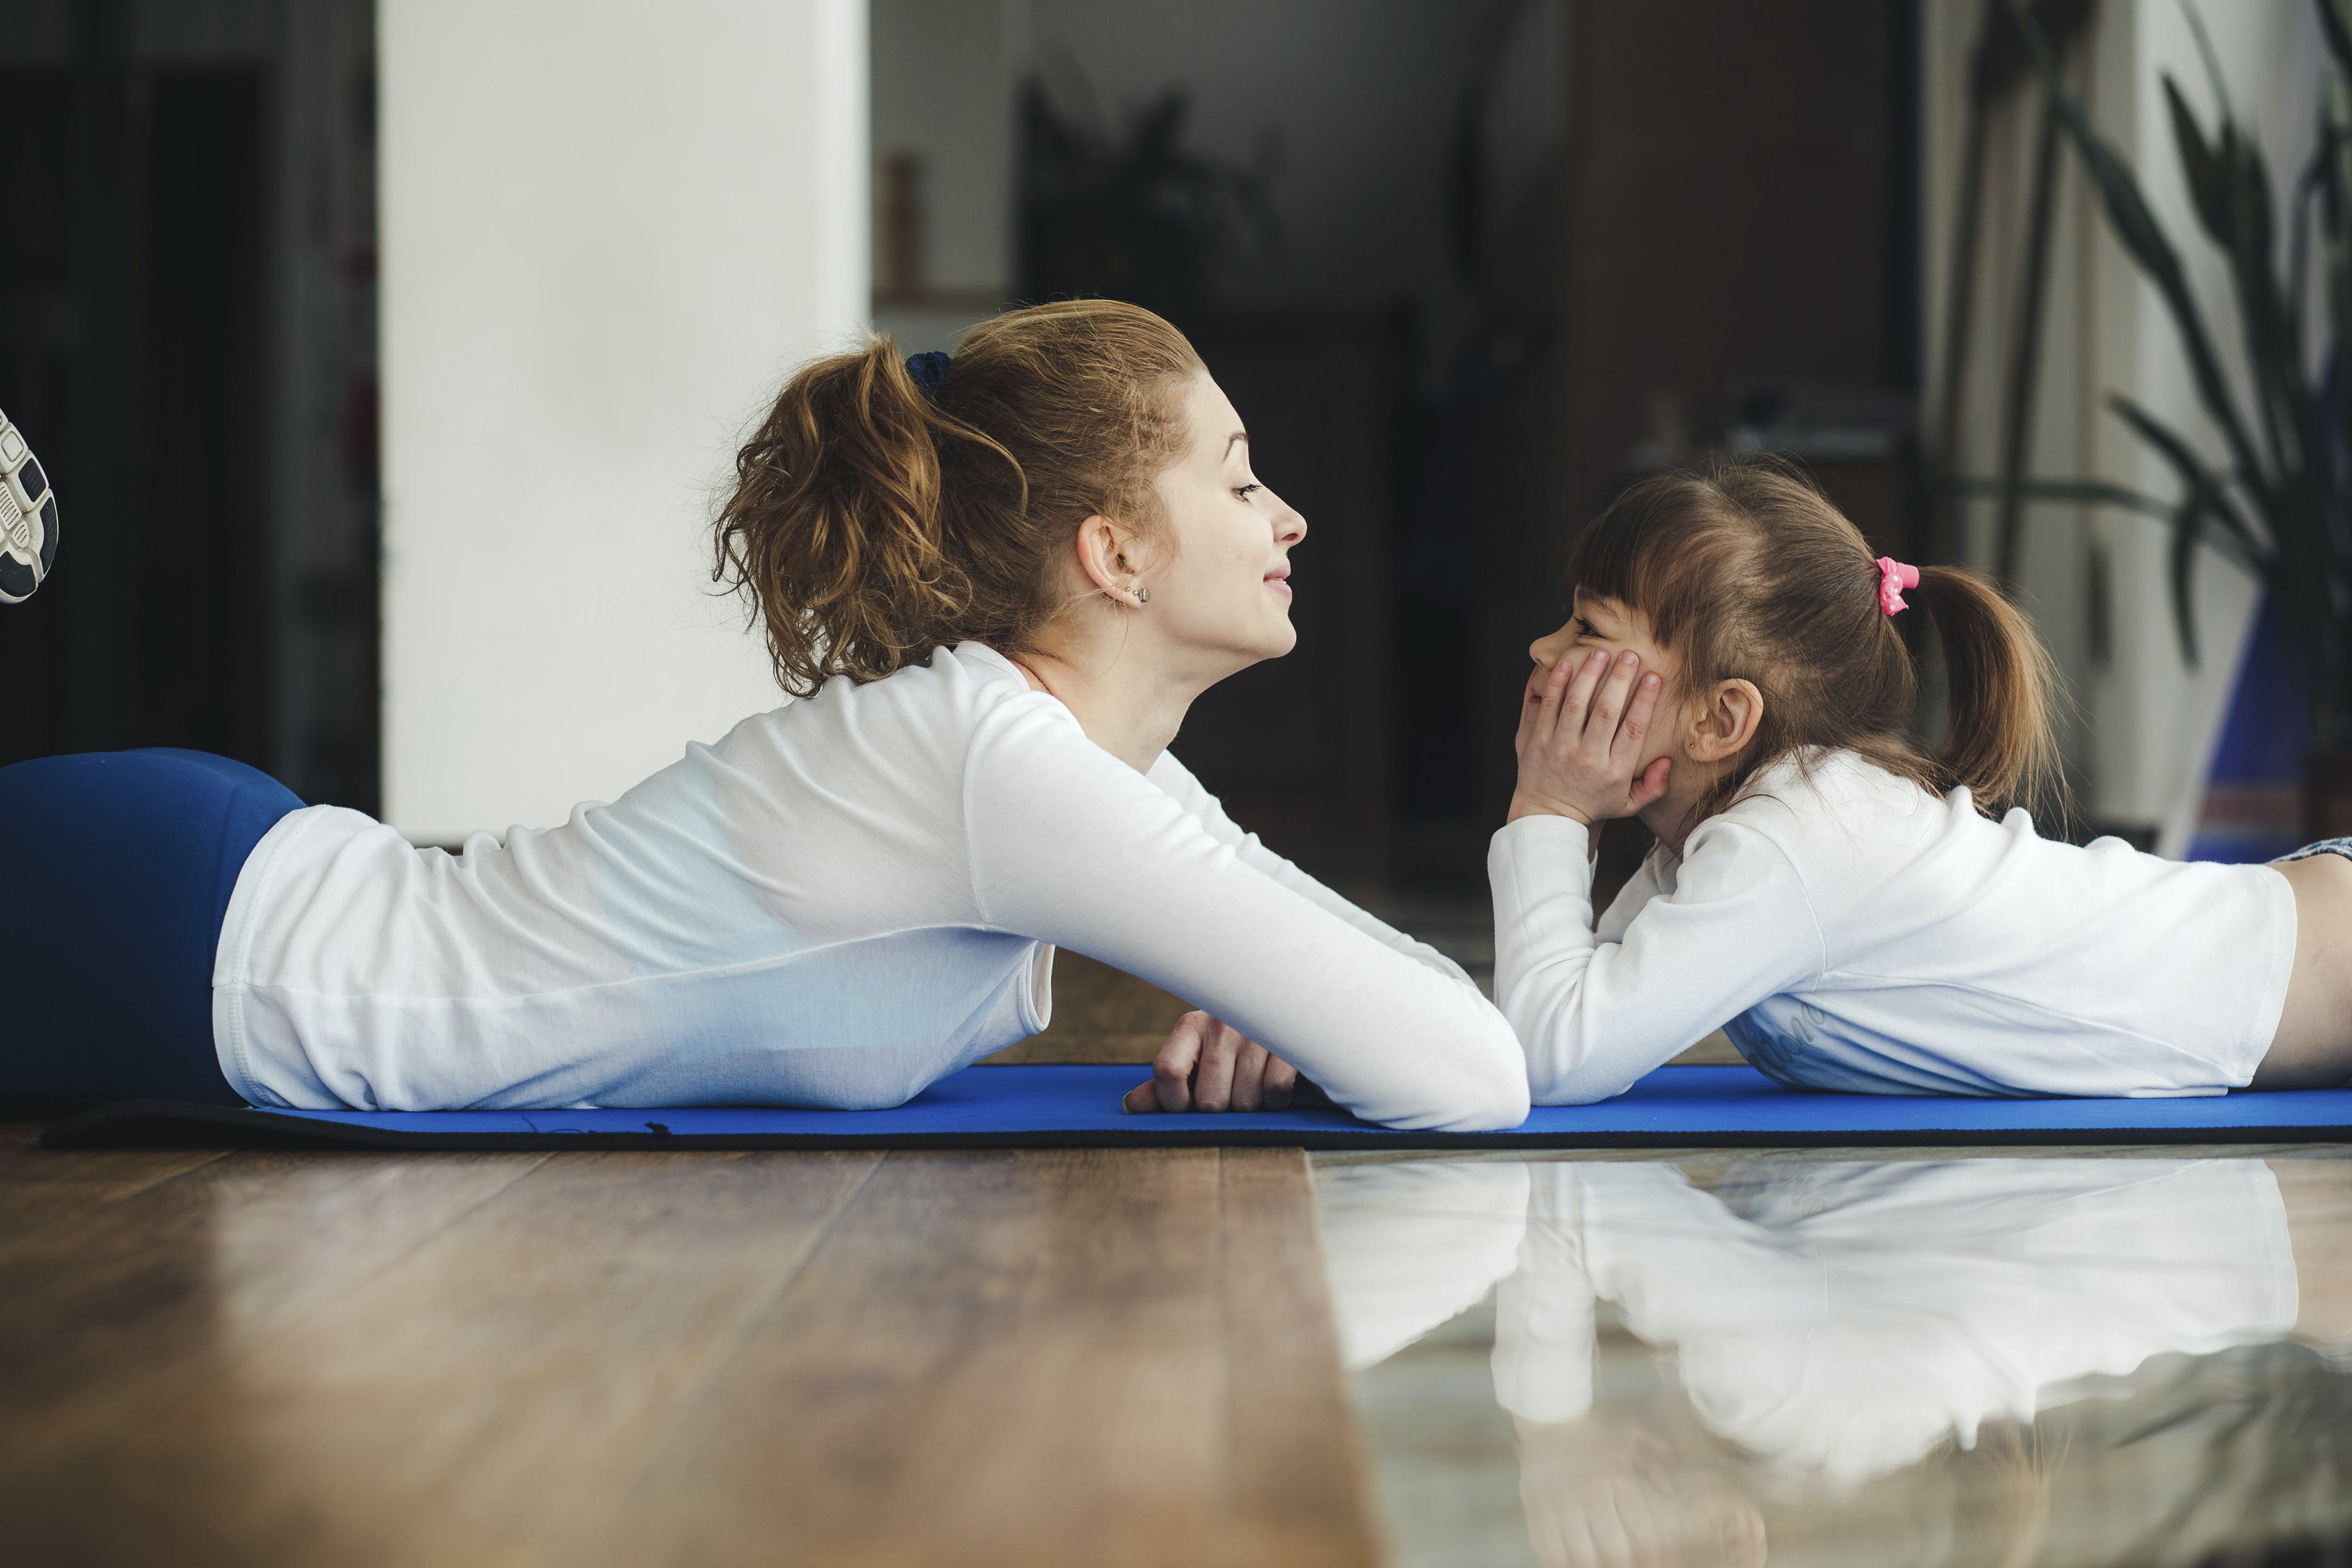 Get Moving! Becoming Physically Active With Your Kids